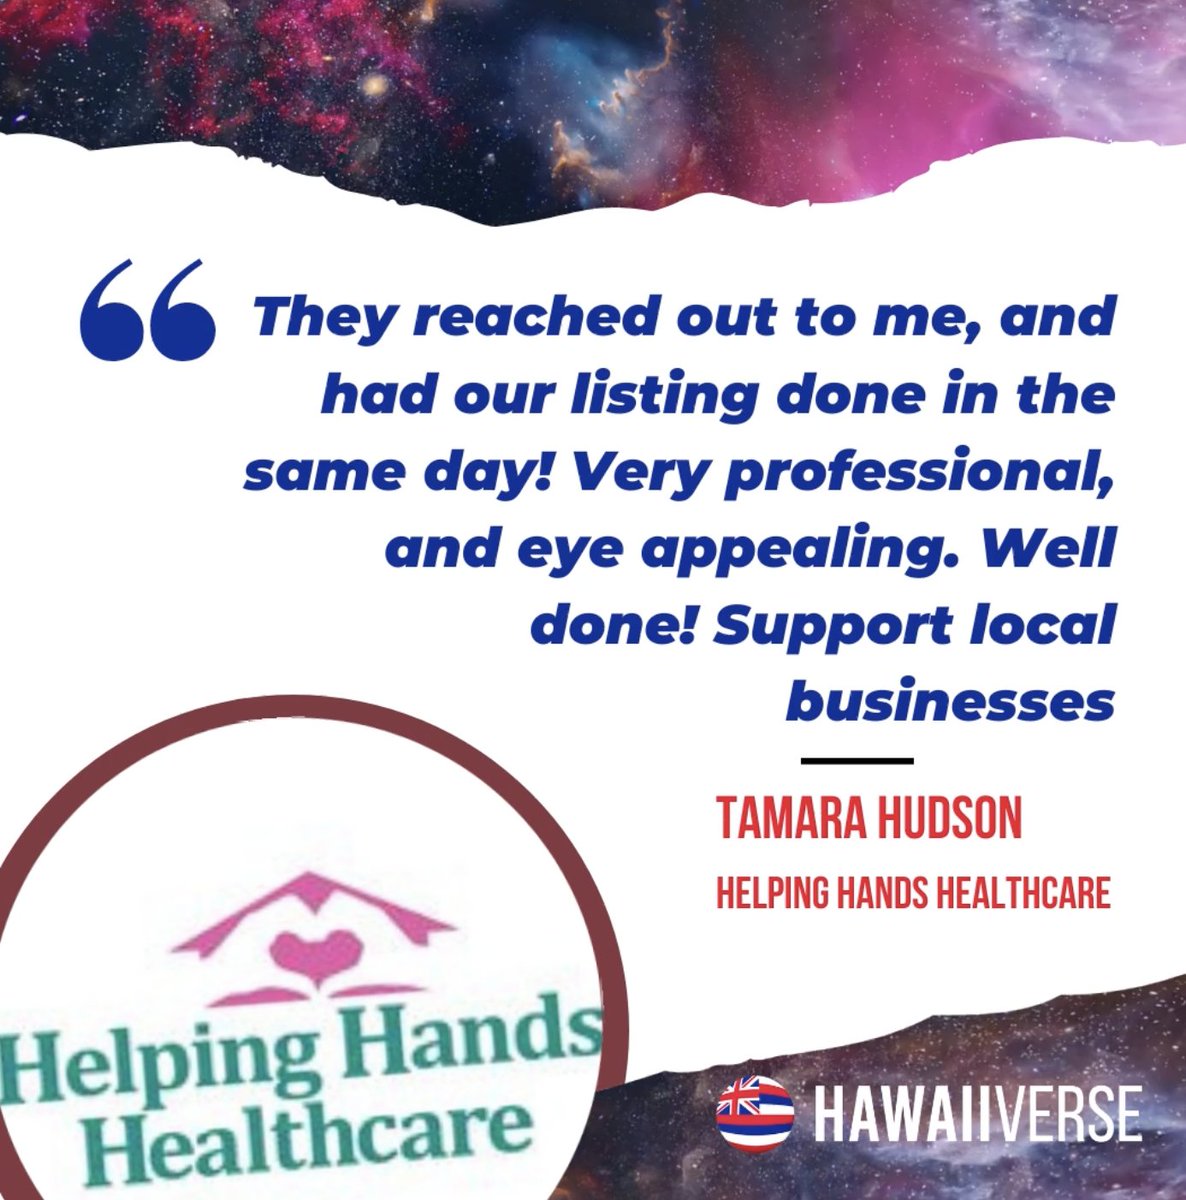 'They reached out to me and had our listing done in the same day! Very professional and eye-appealing. Well done! Support local businesses' - Tamara Hudson, Helping Hands Healthcare

#hawaiiverse #mahalonuiloa #supportlocalhi #supportlocalhawaii  #review #testimonial